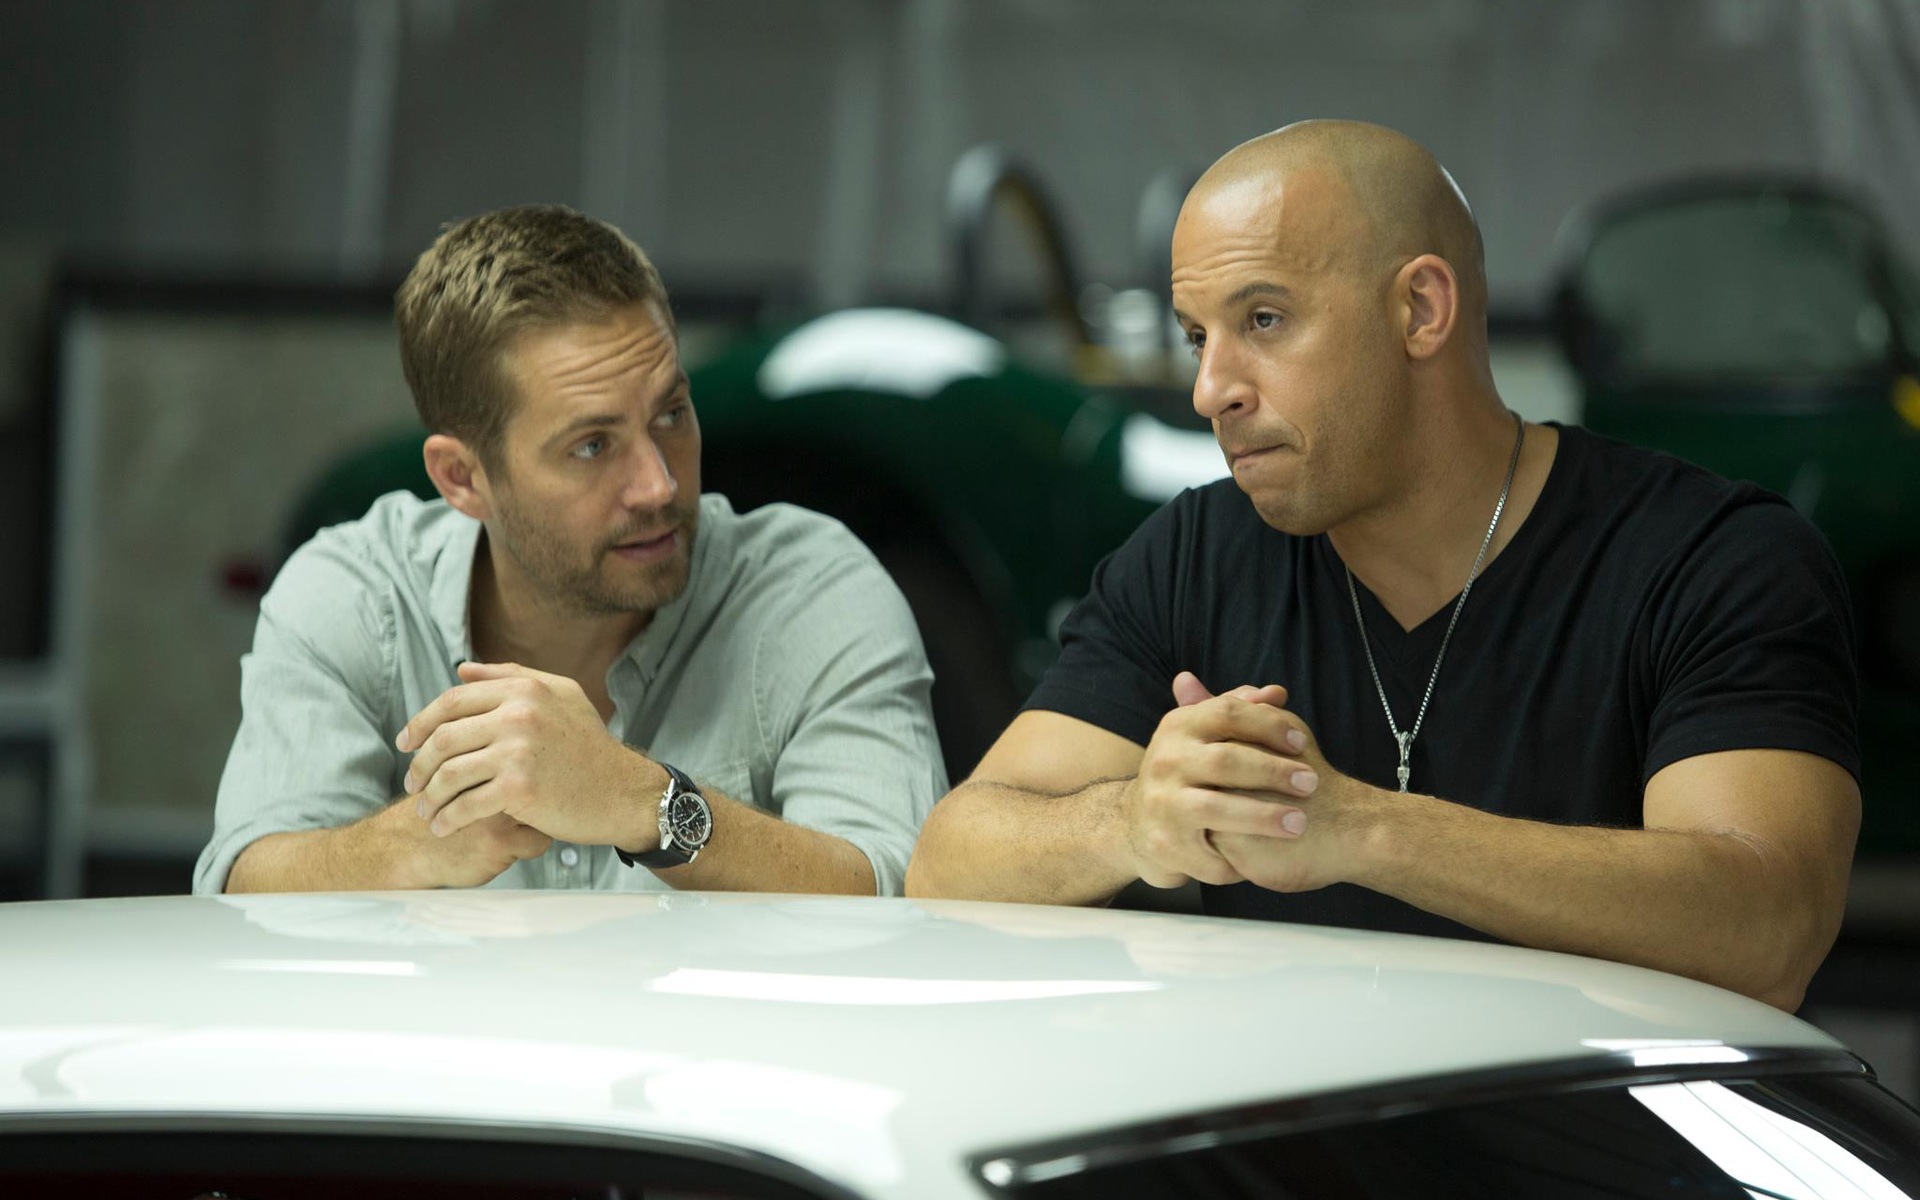 Fast And Furious 6 HD movie wallpapers #8 - 1920x1200